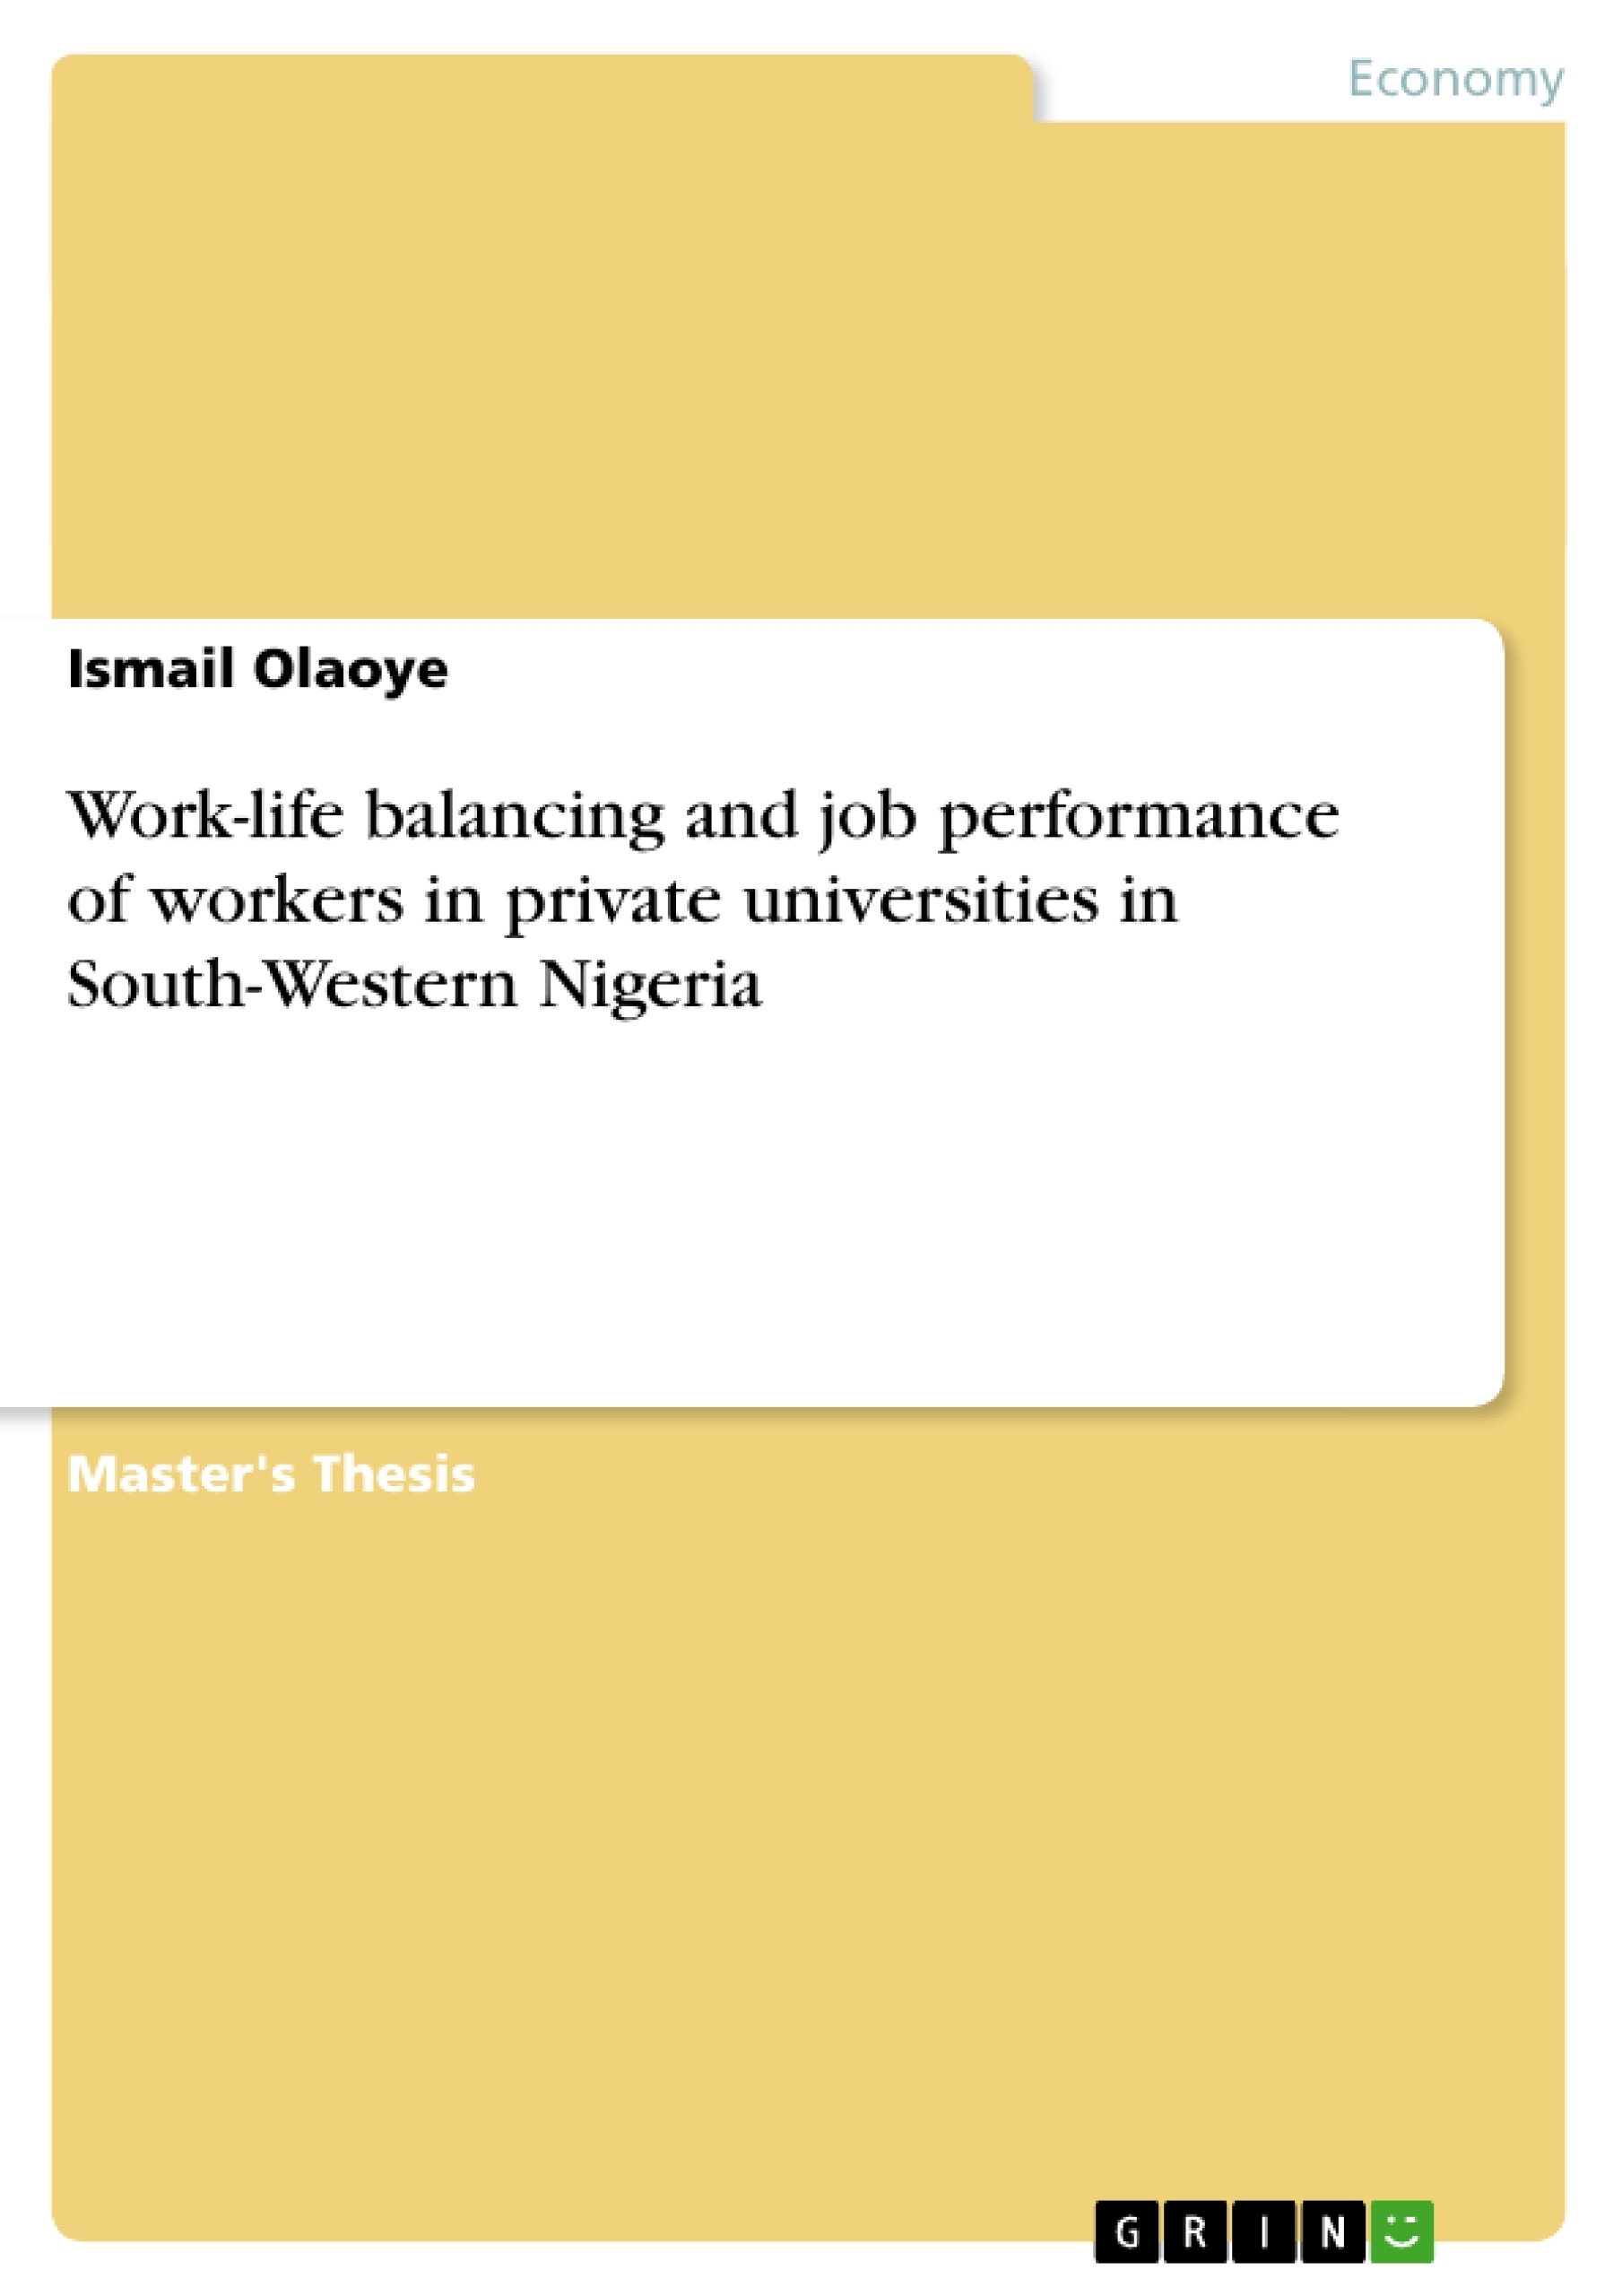 Title: Work-life balancing and job performance of workers in private universities in South-Western Nigeria